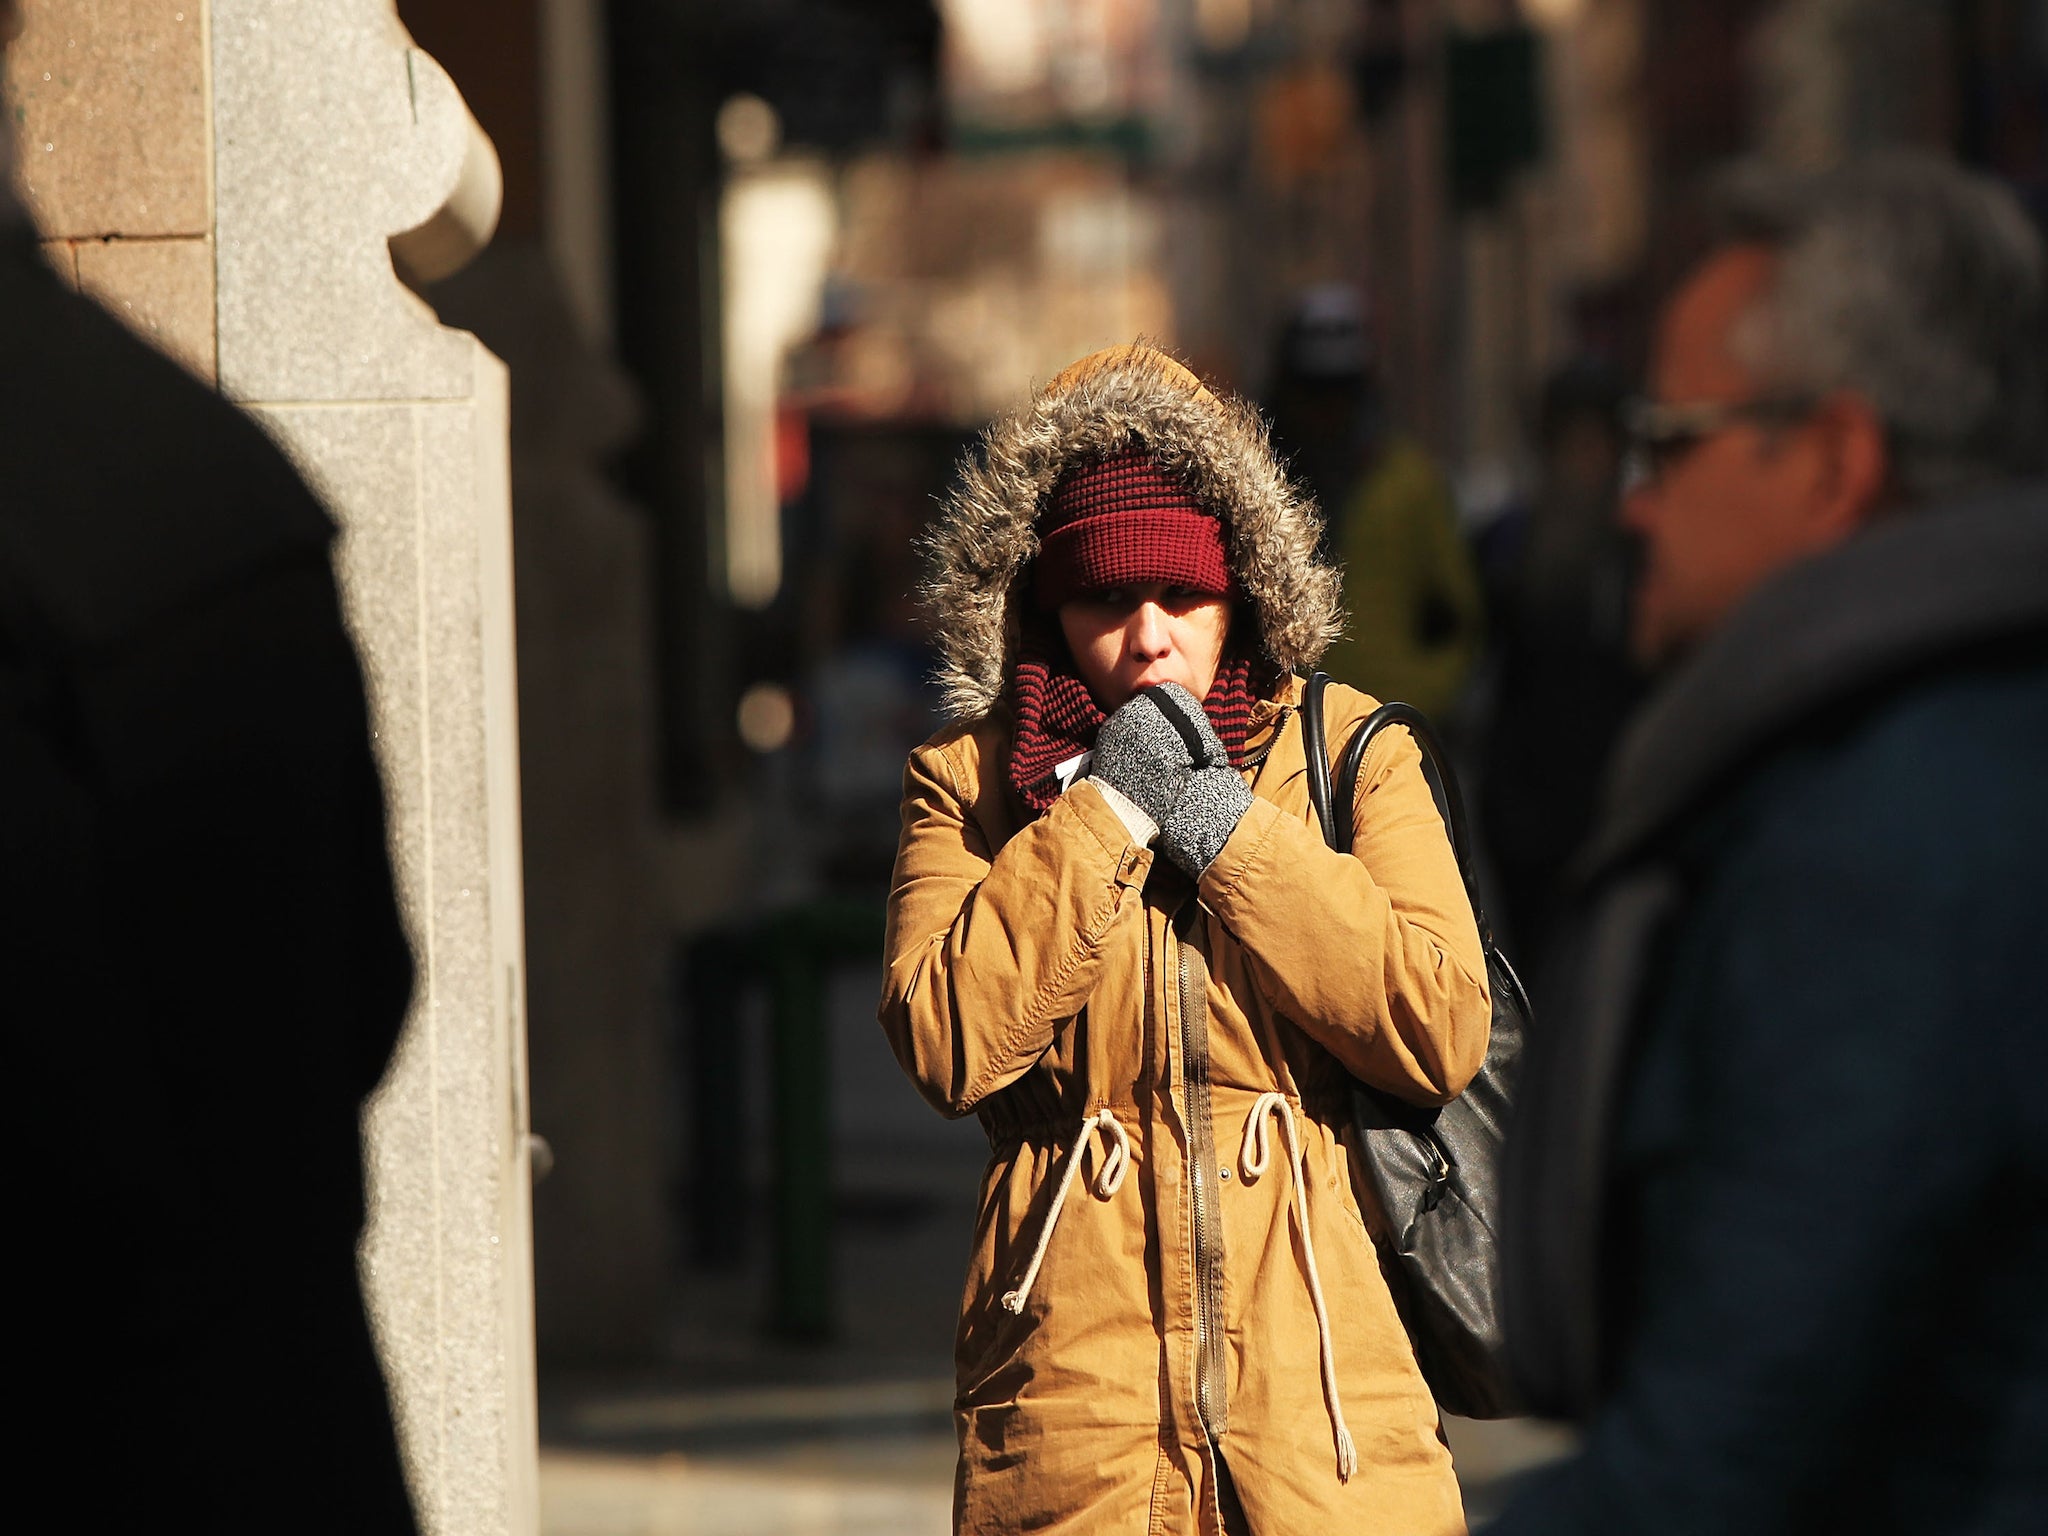 New Yorkers are expecting even colder weather on Friday